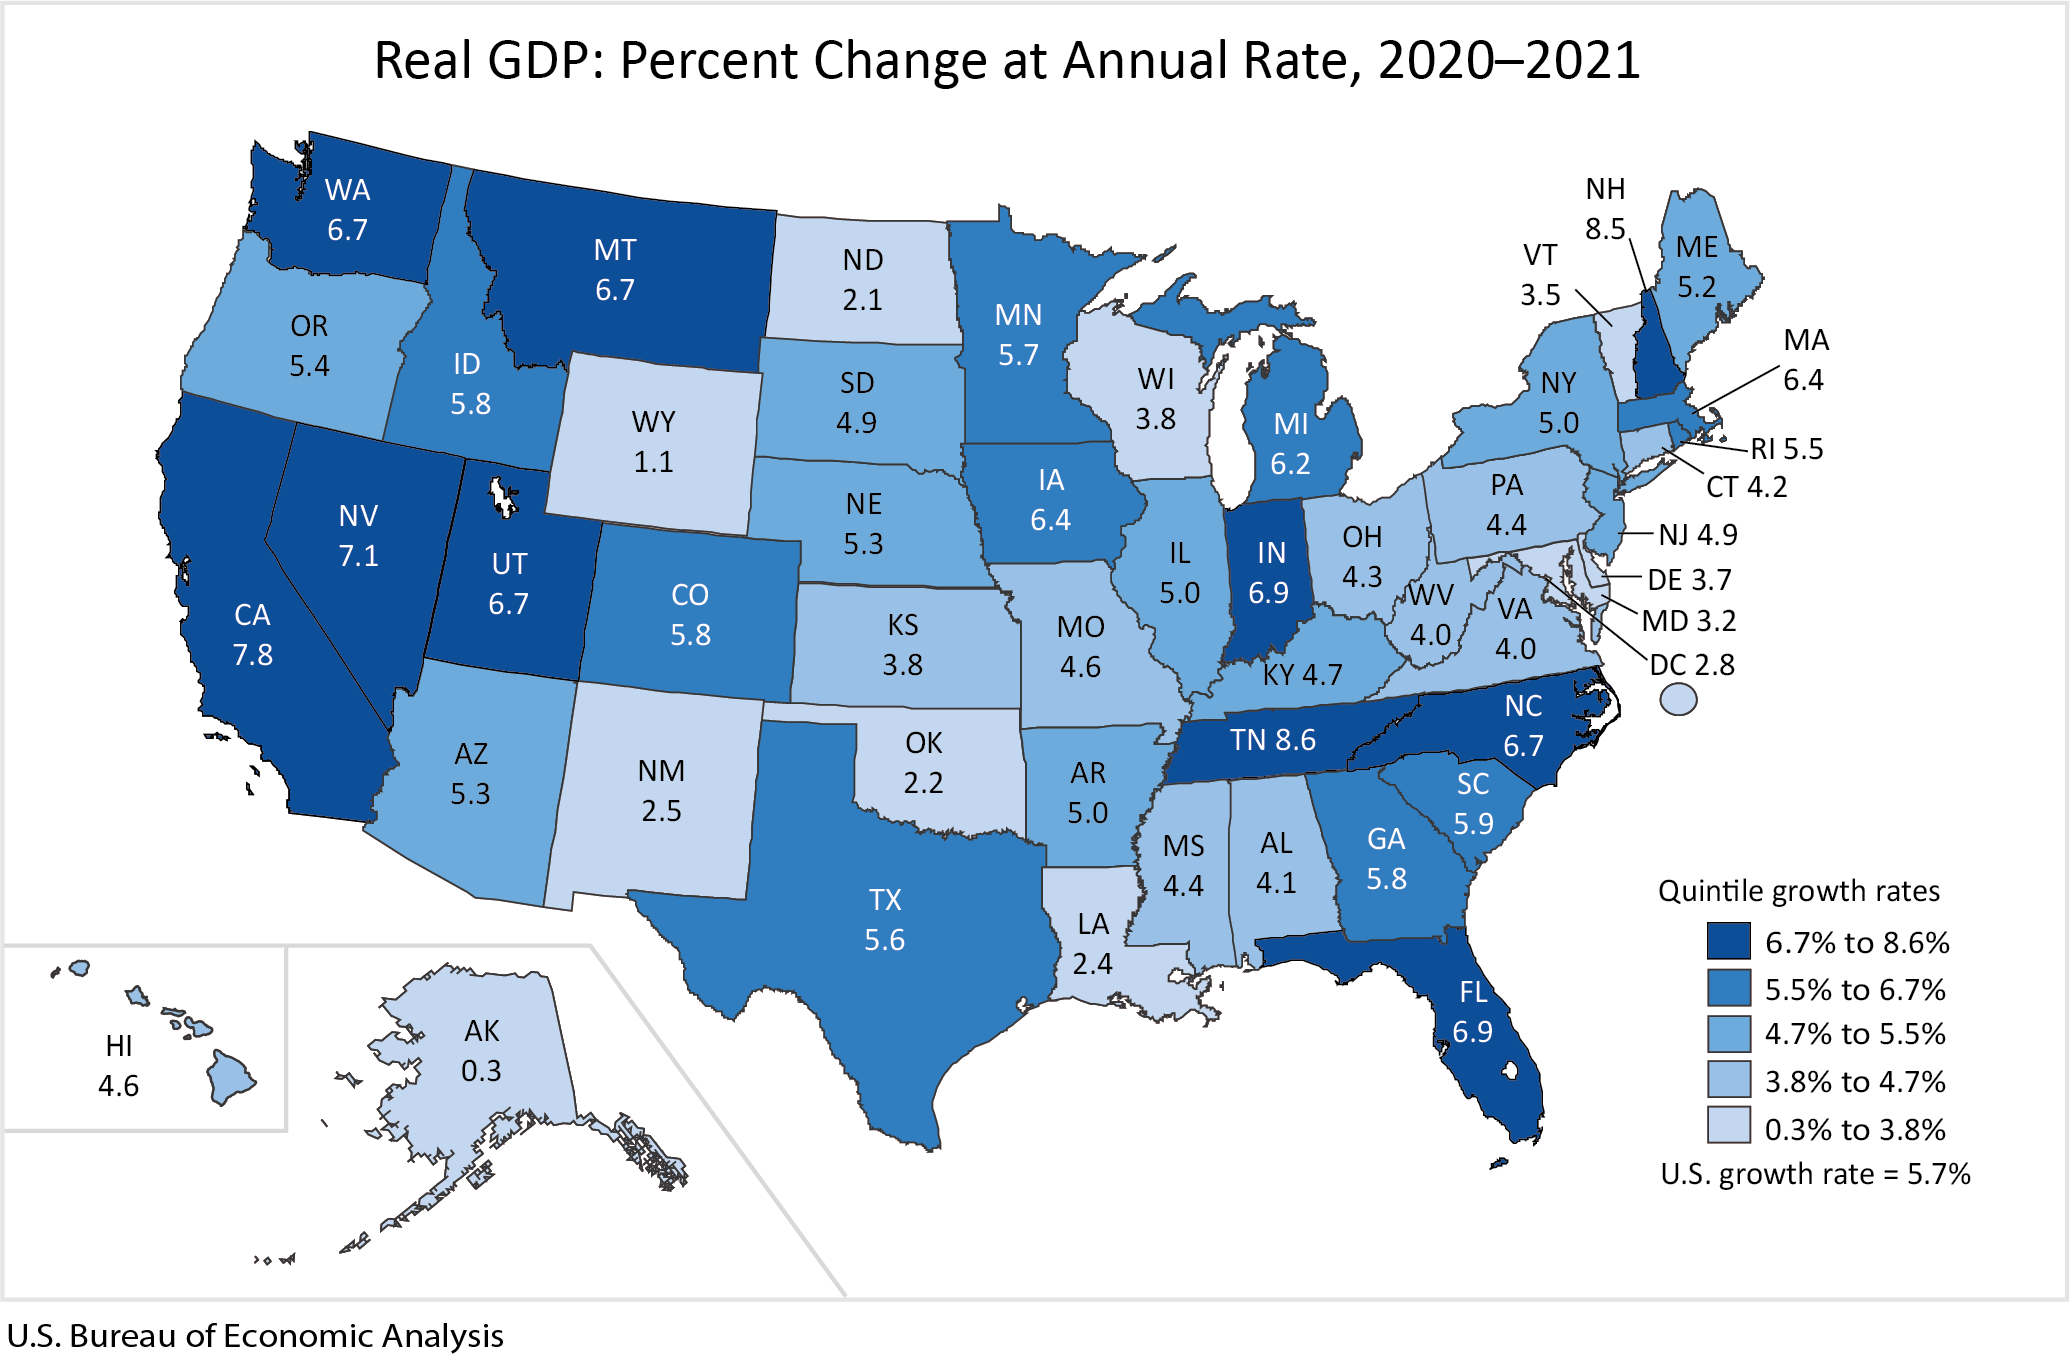 Real GDP: Percent Change at Annual Rate, 2020-2021